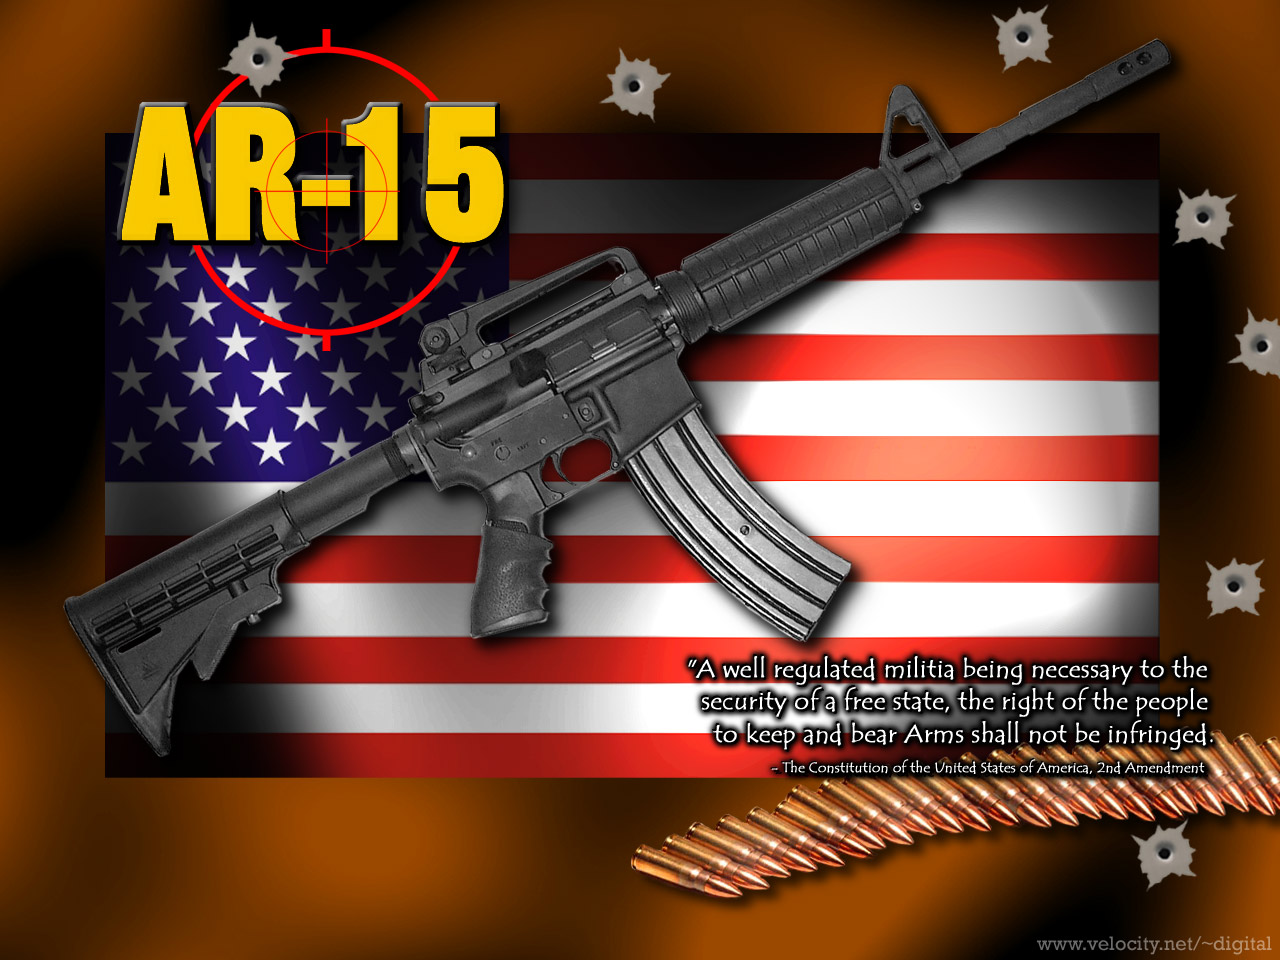 Screen Saver Ar15 Archive